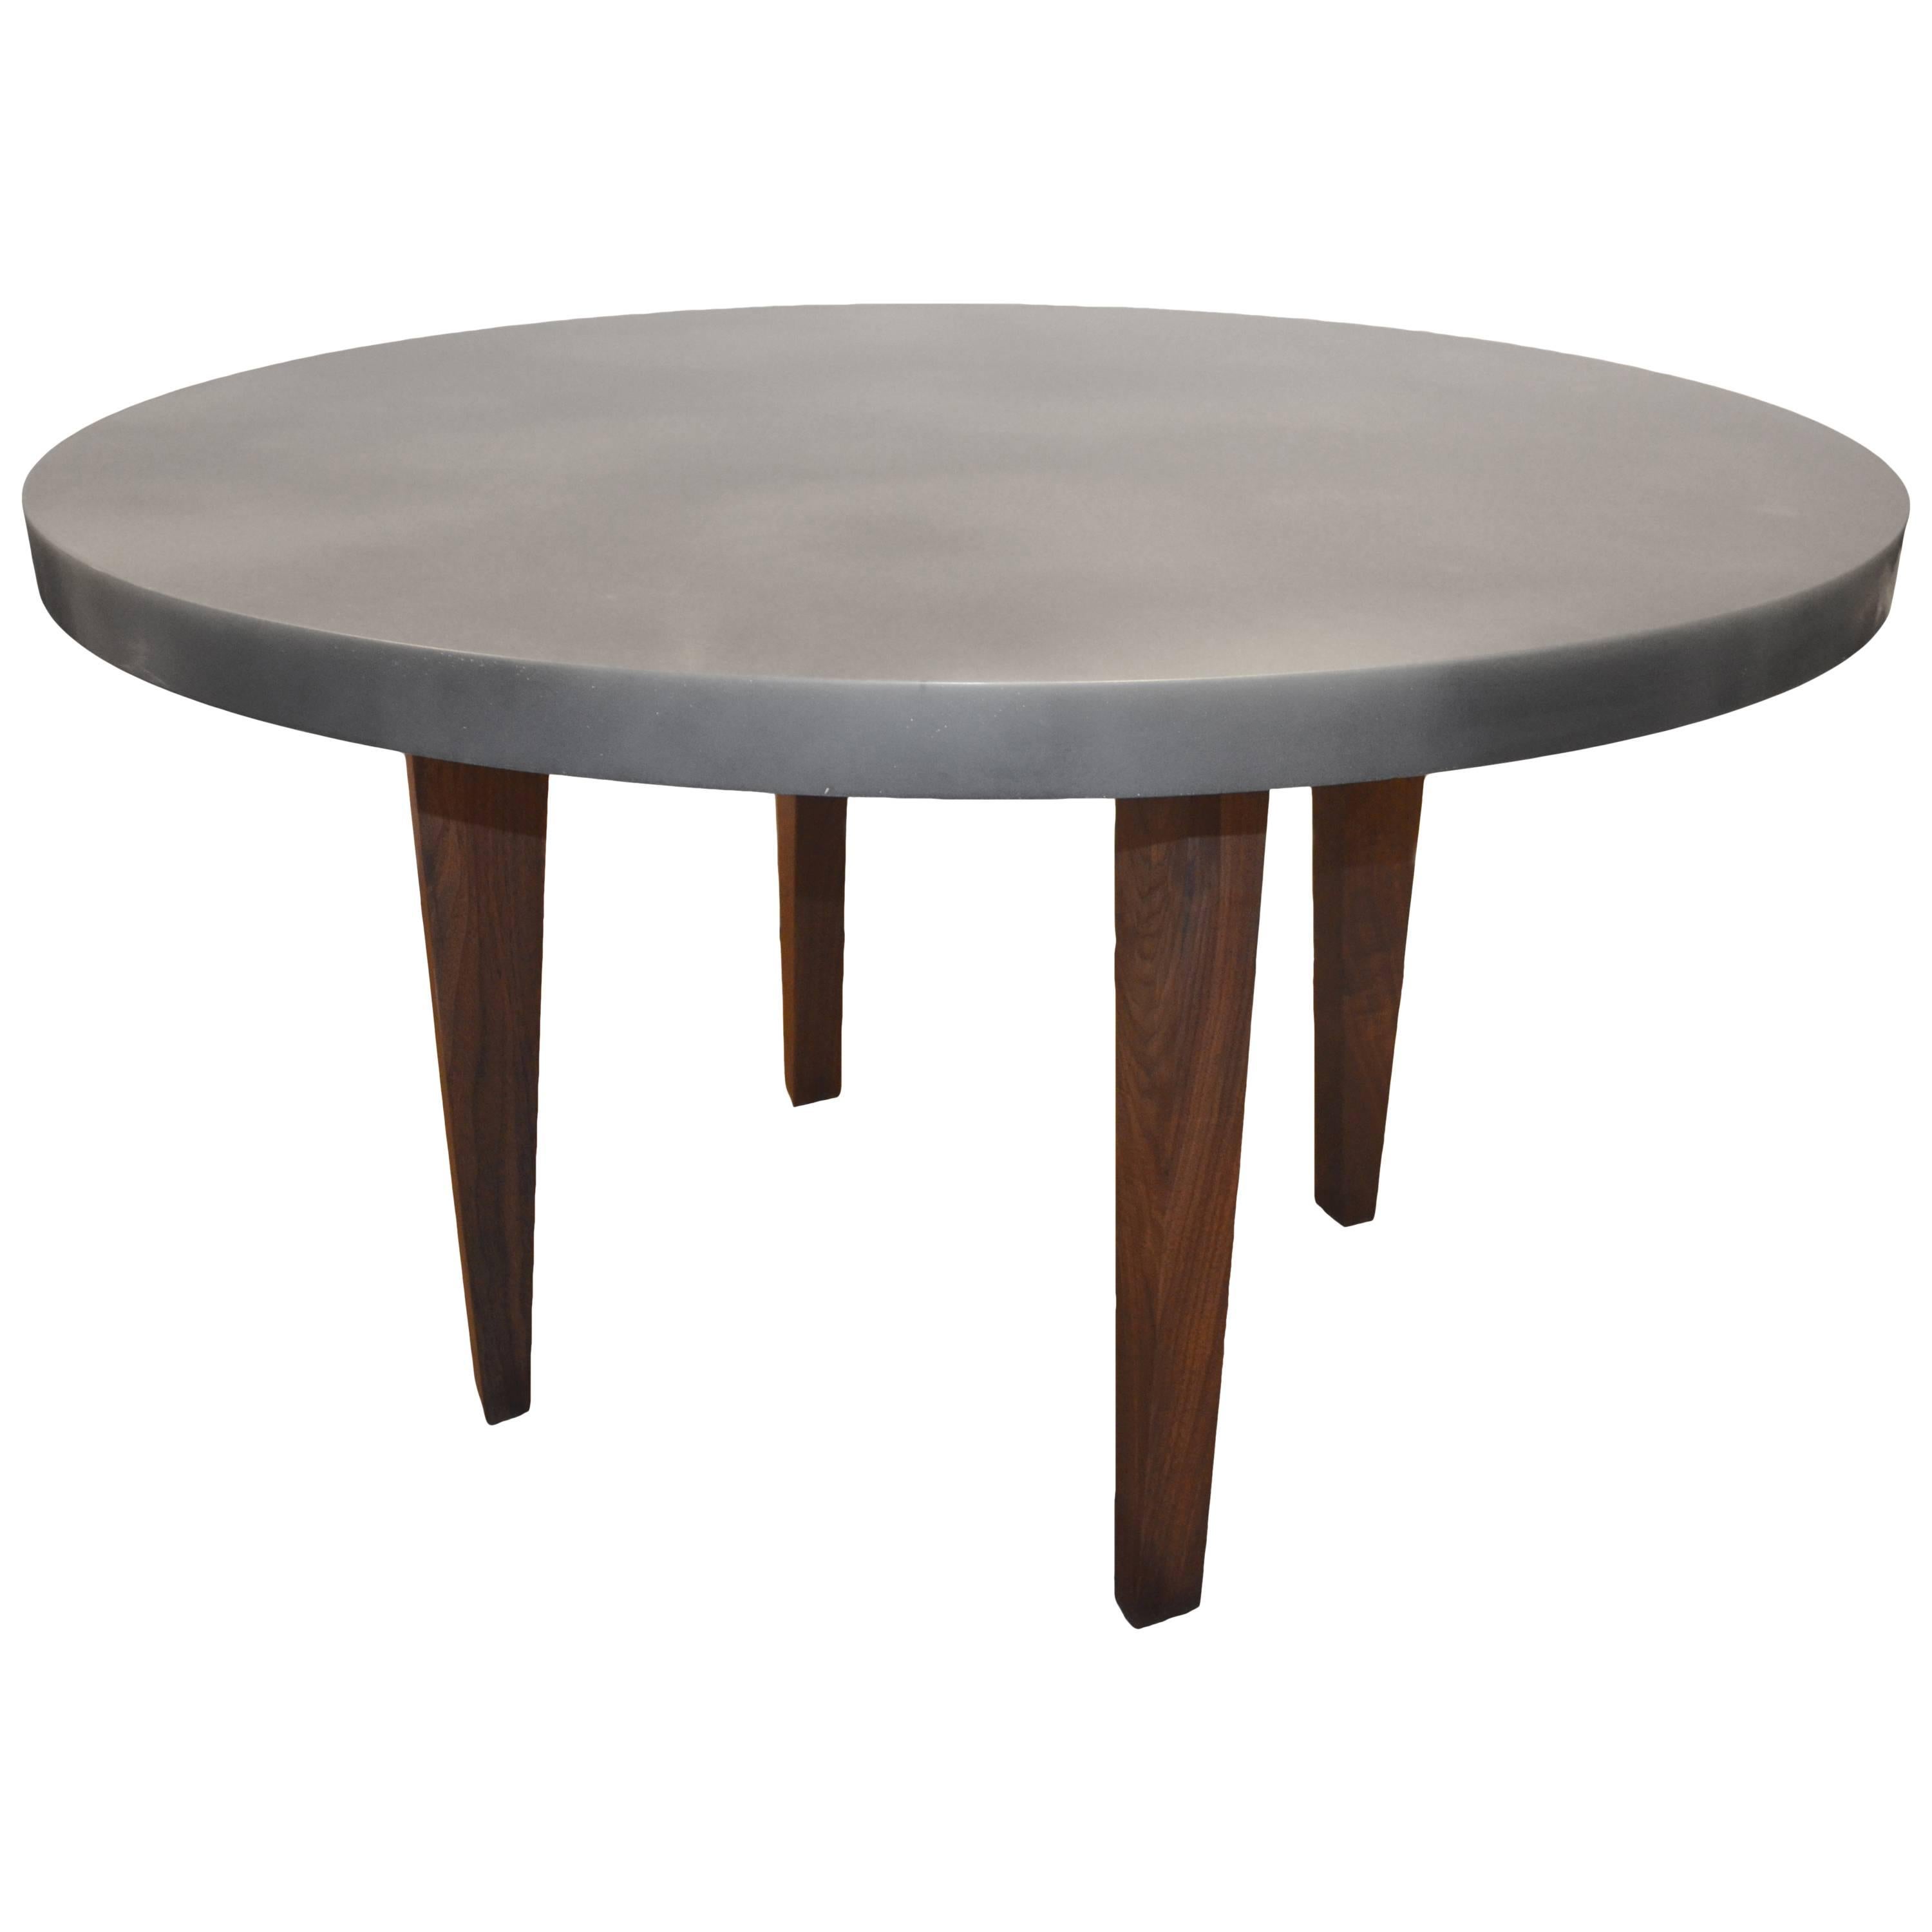 Andrianna Shamaris Black Walnut Wood Table and Resin Coated Top For Sale